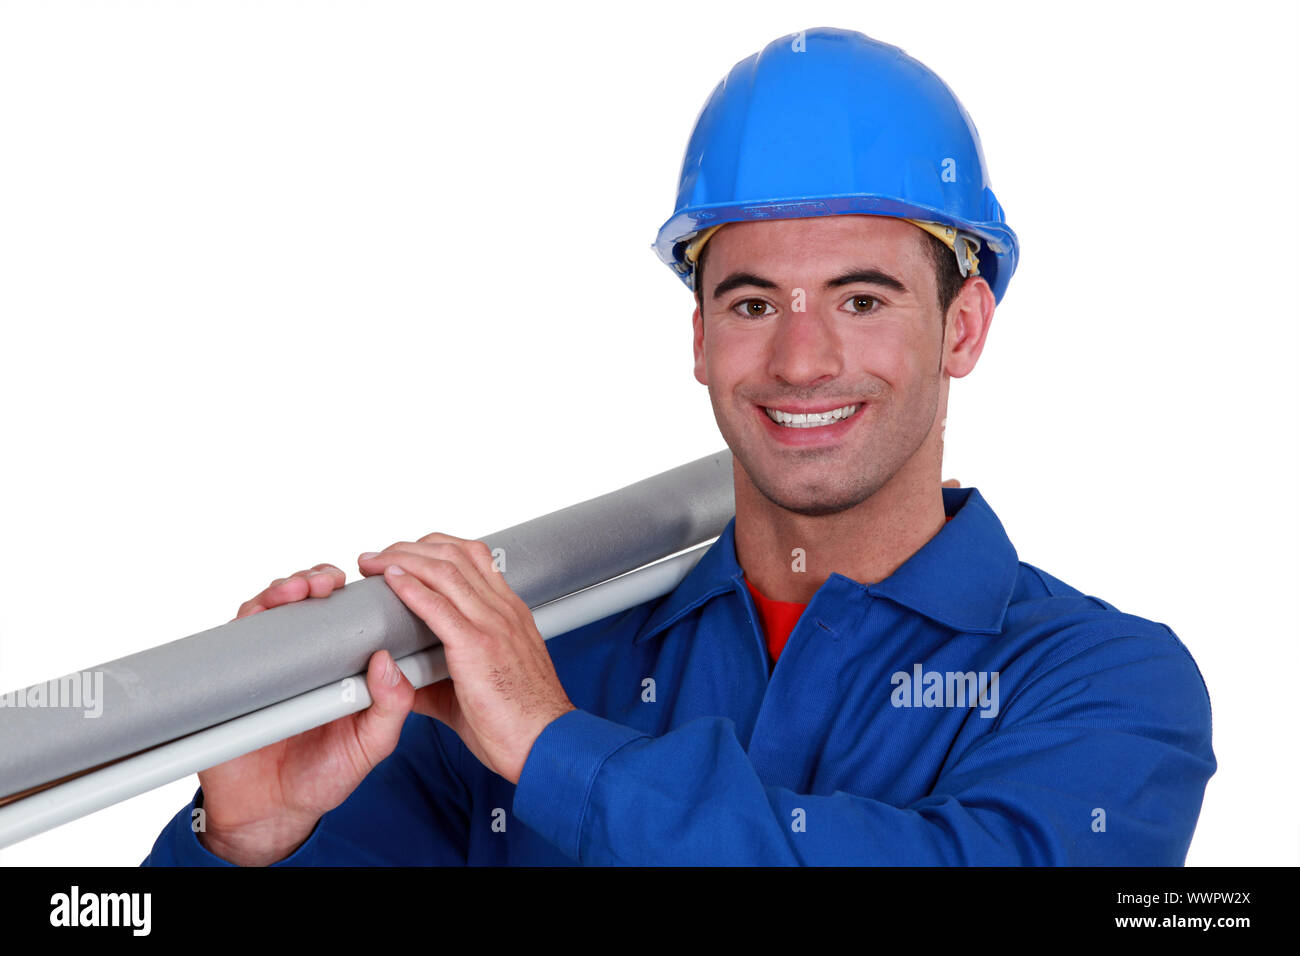 A construction worker carrying a long tube. Stock Photo